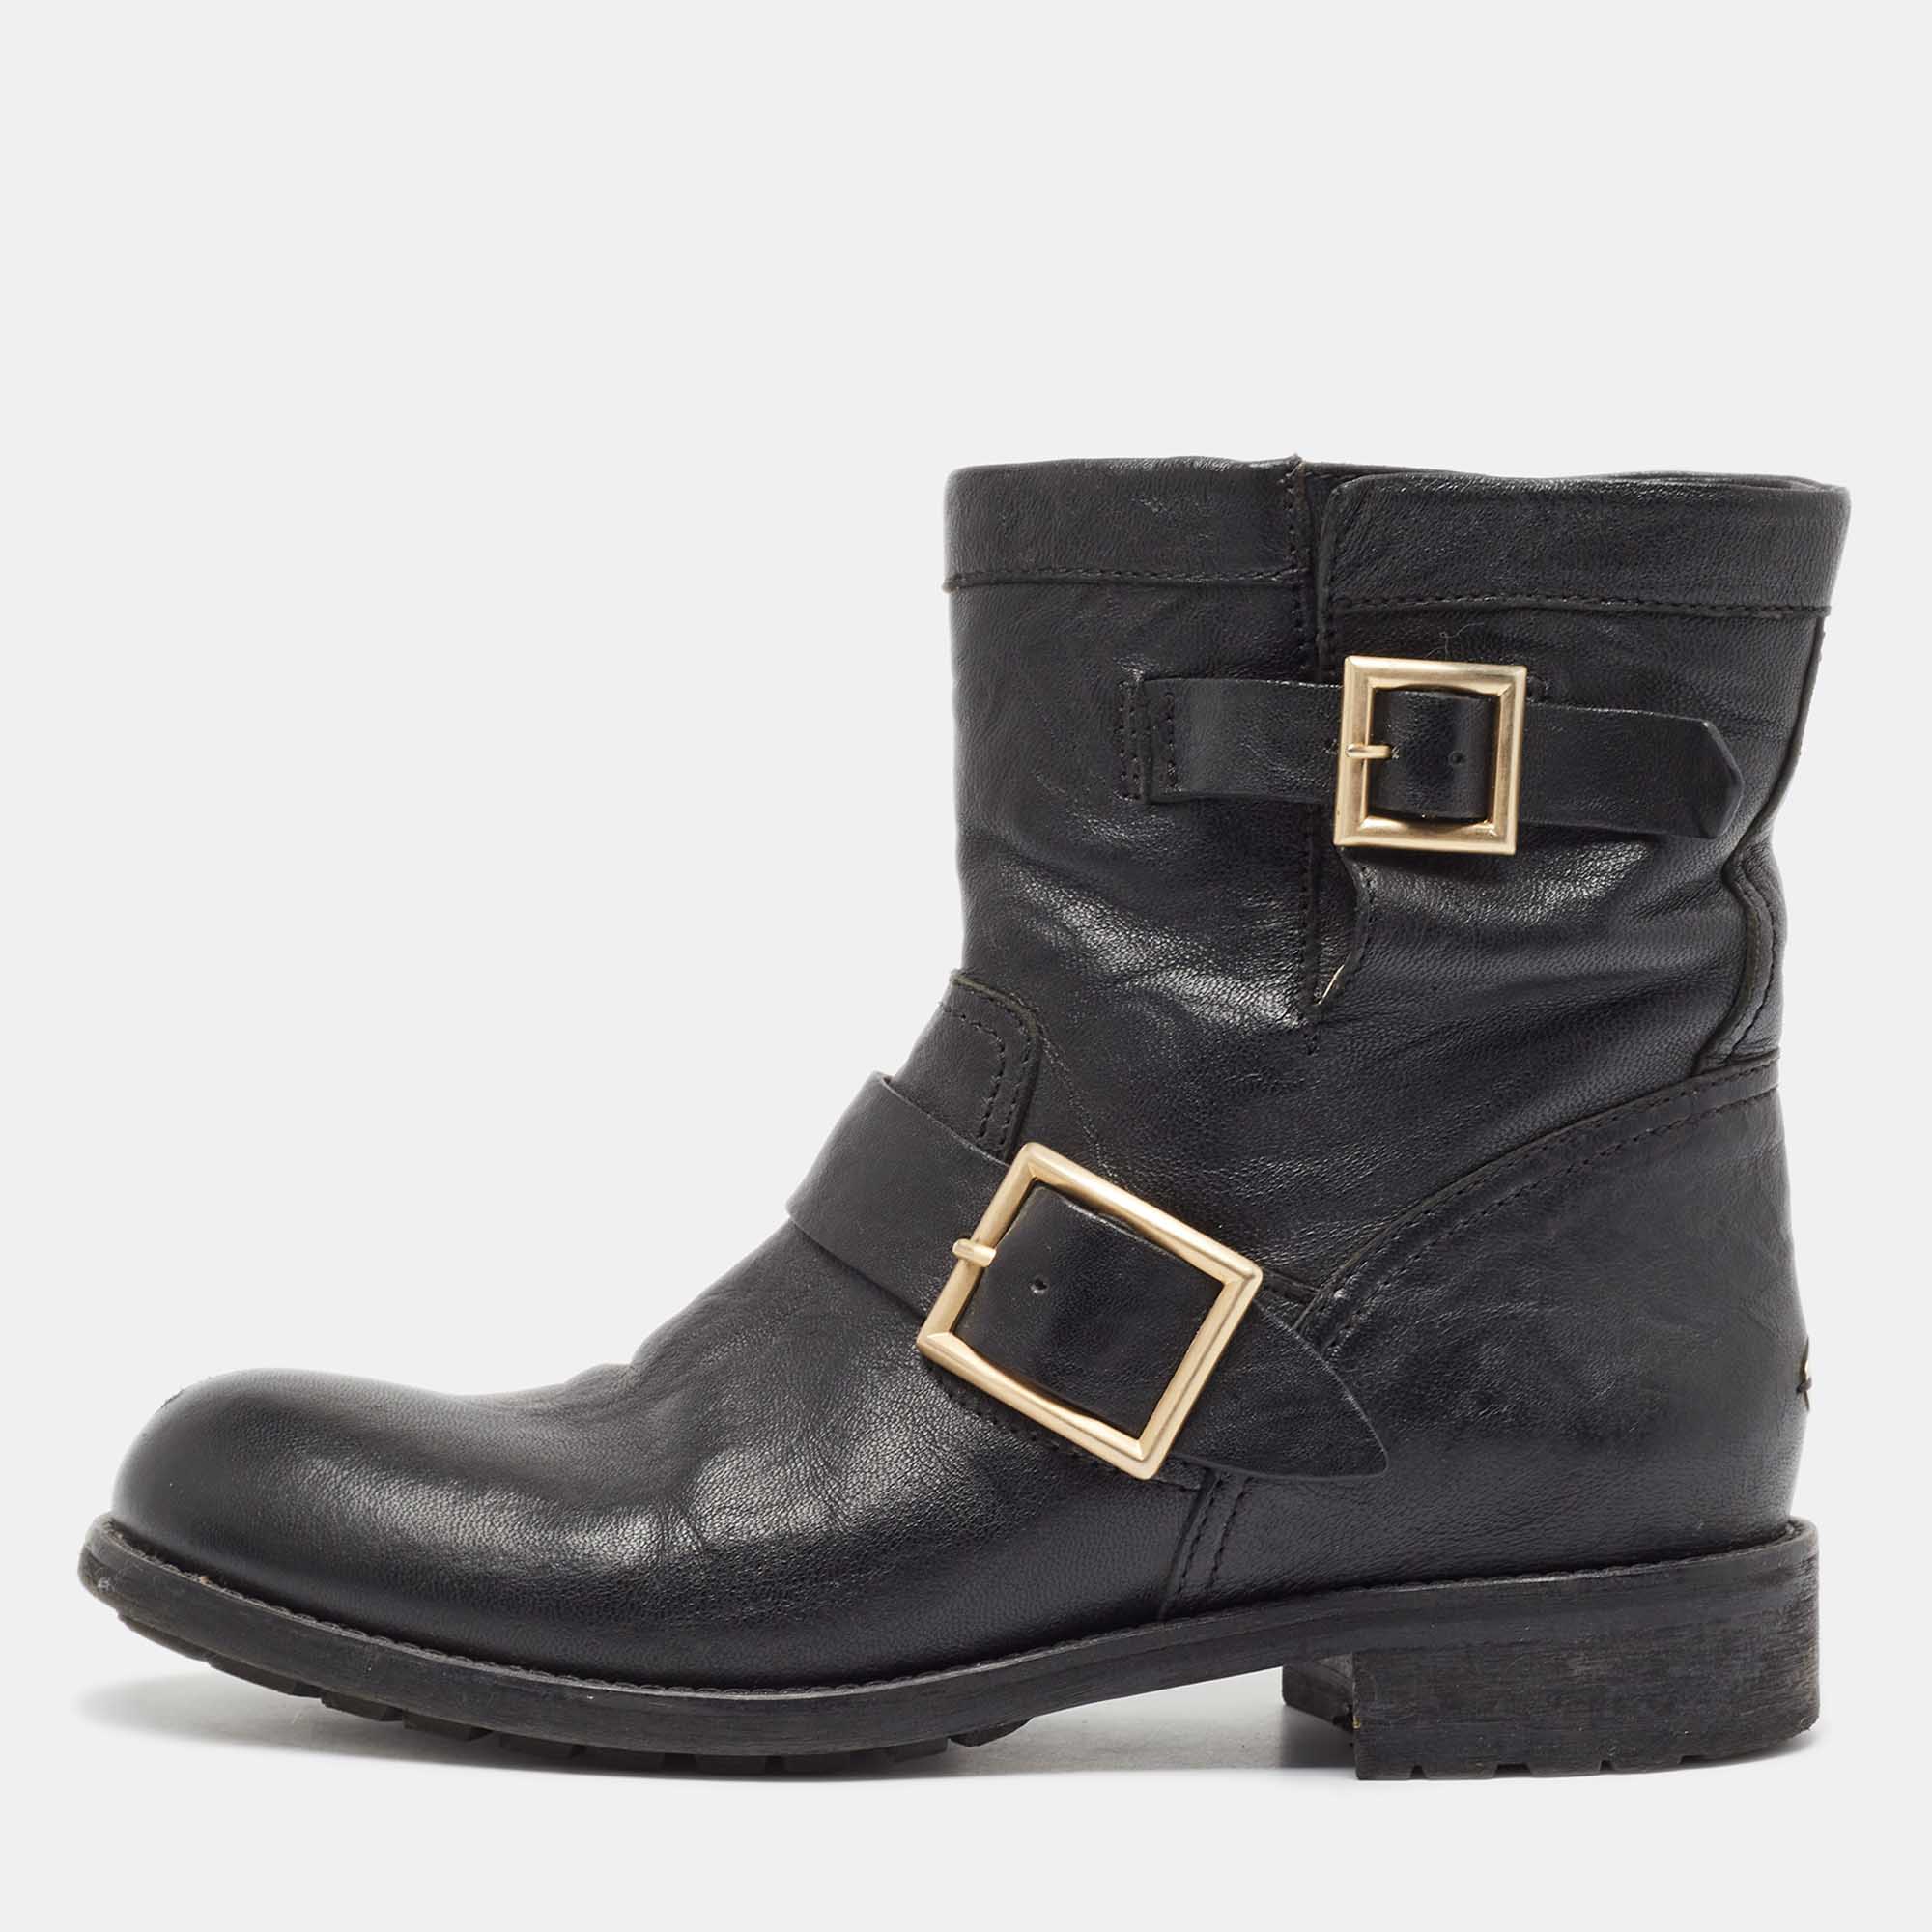 

Jimmy Choo Black Leather Buckle Detail Ankle Boots Size